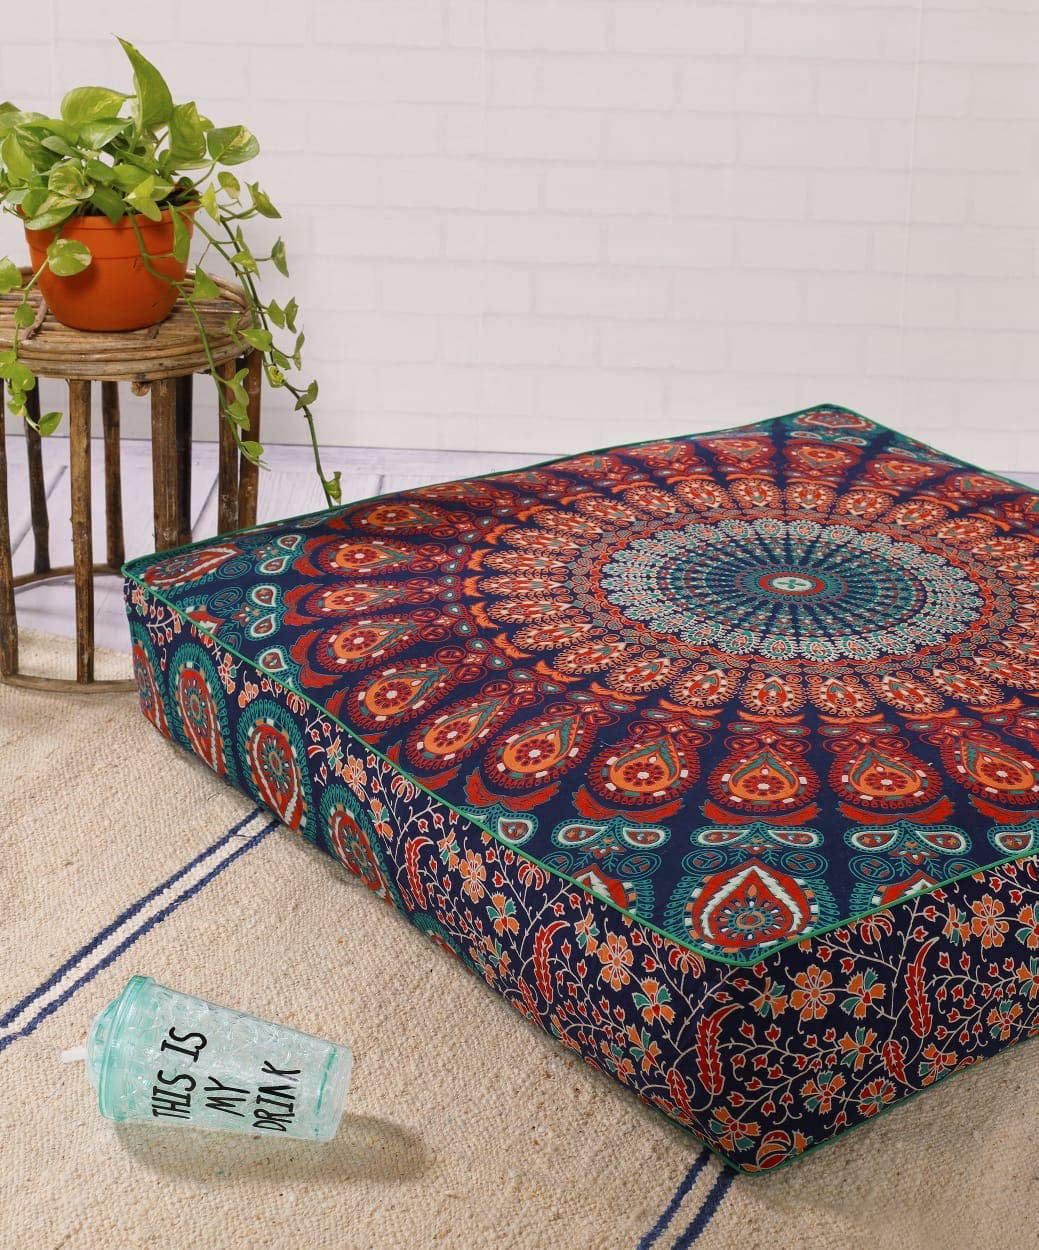 THE ART BOX Indian Hippie Ombre Mandala Floor Pillow Cover Square Ottoman Pouf Cover Daybed Oversized Cotton Cushion Cover with Heavy Duty Zipper Seating